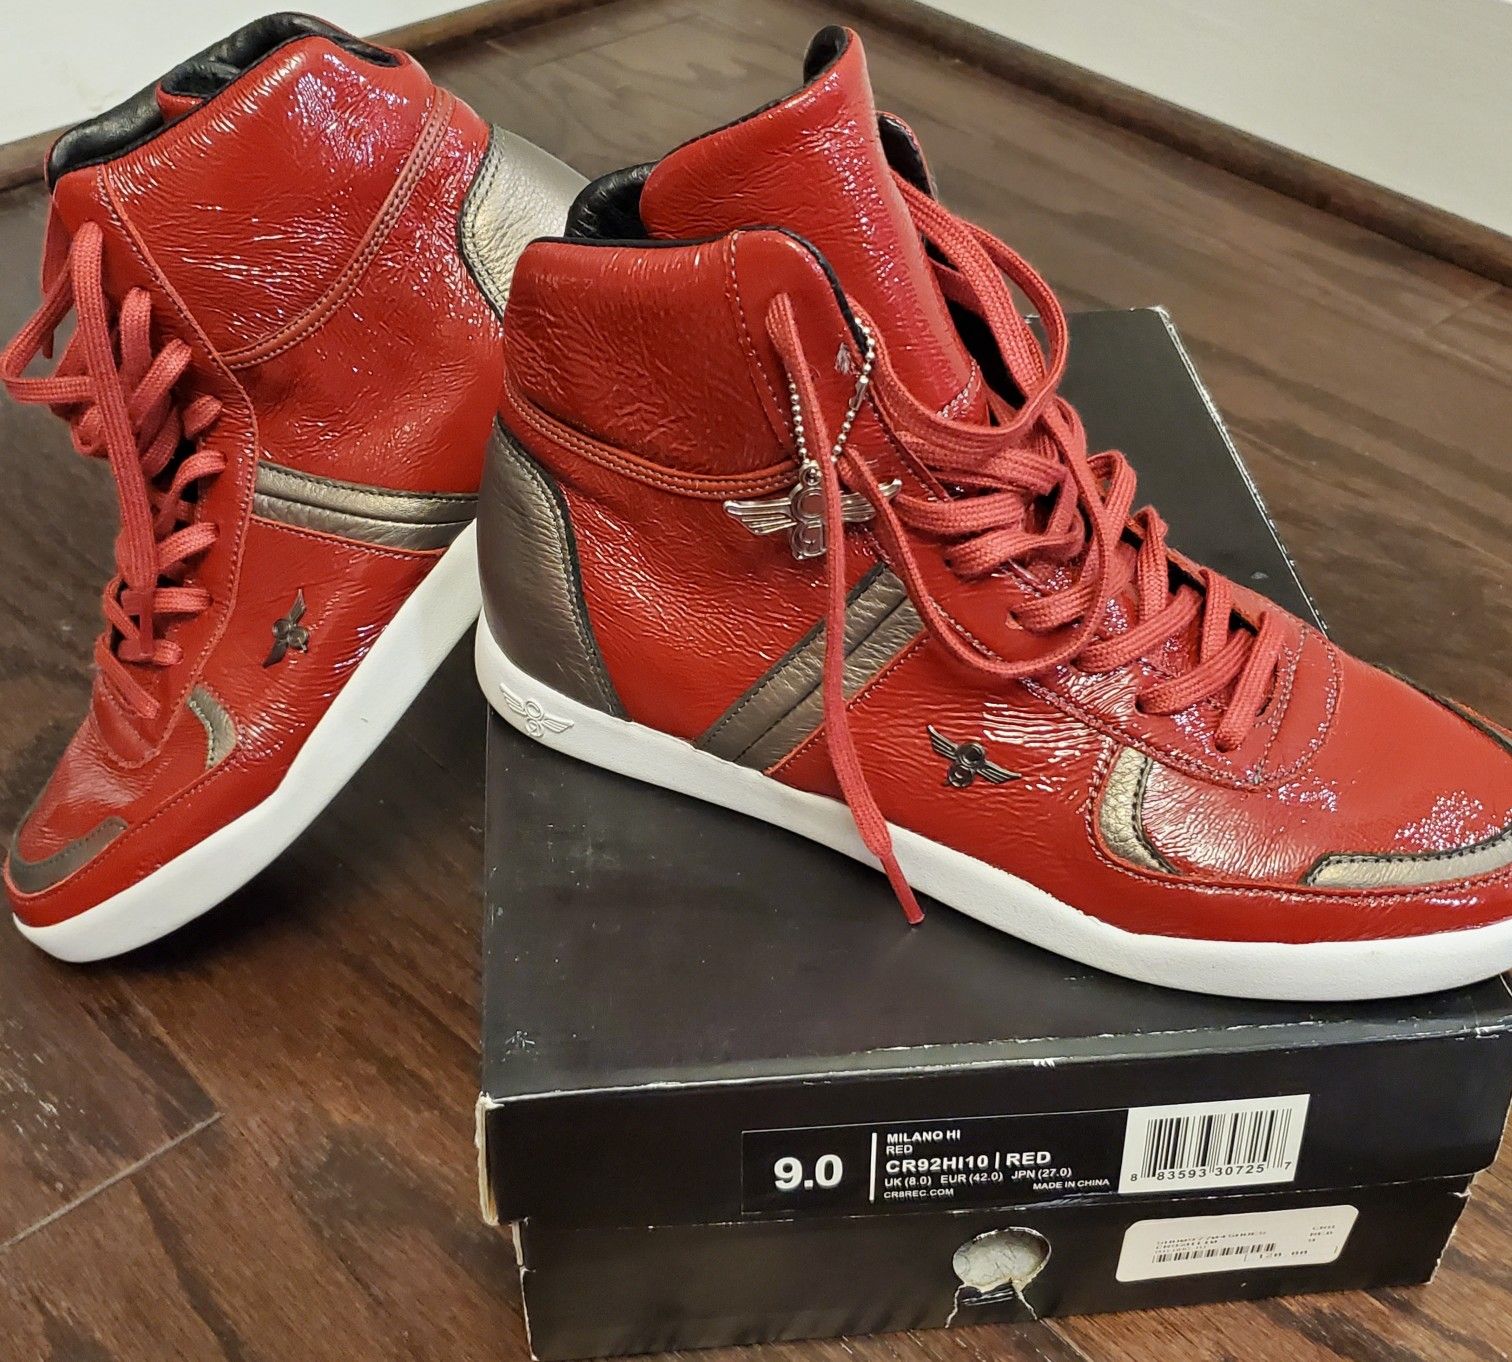 Red Leather High Top Sneakers - $30